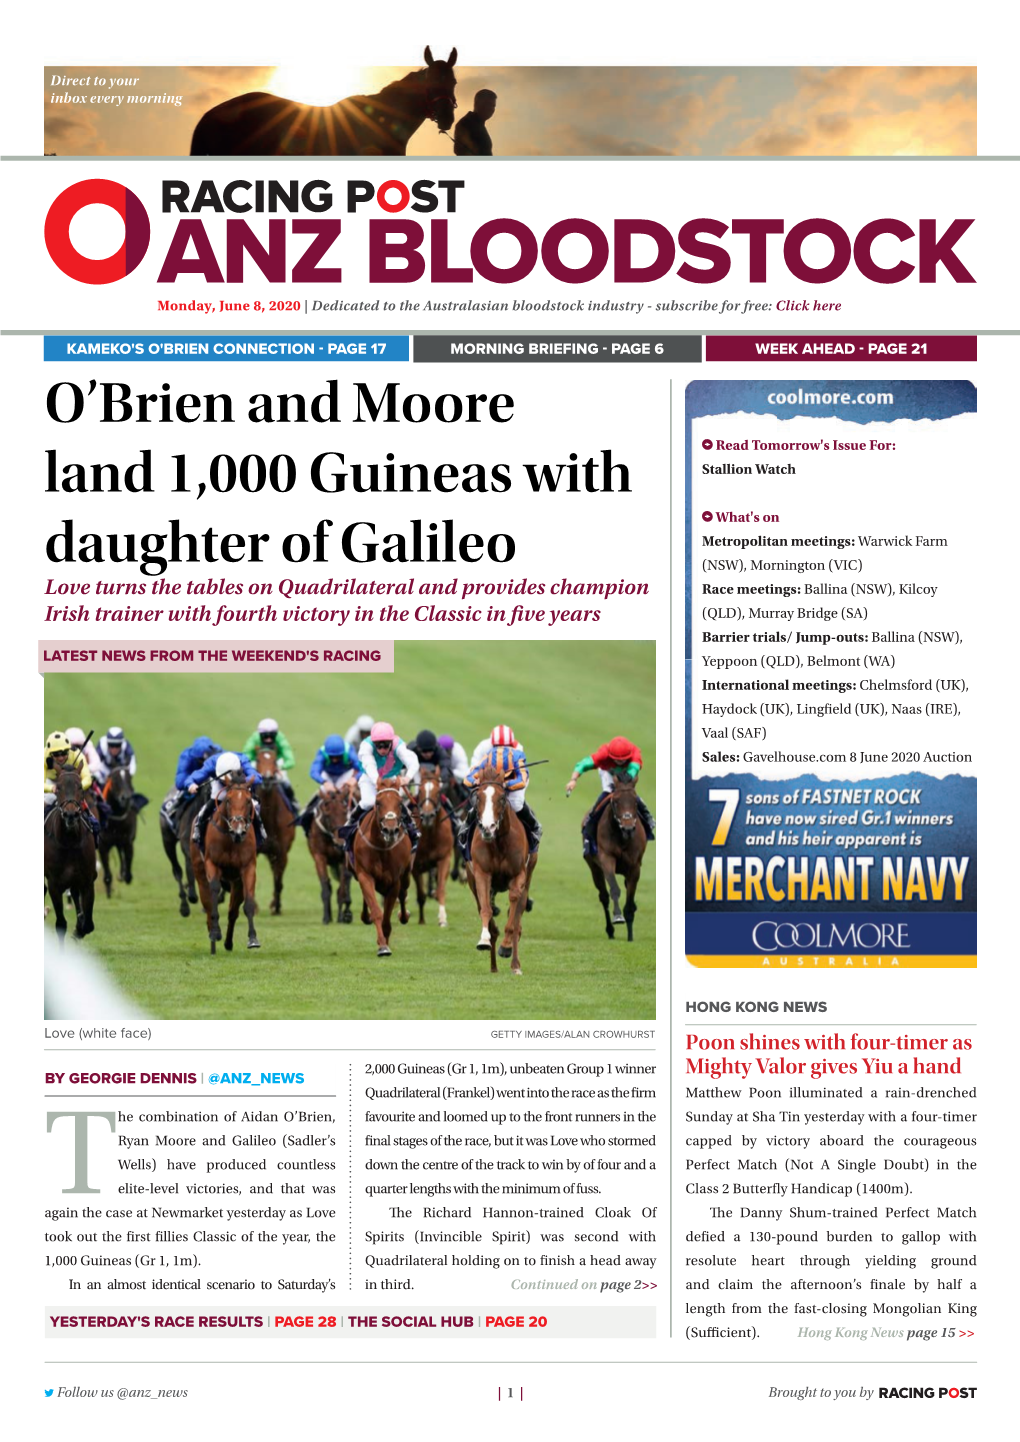 O'brien and Moore Land 1,000 Guineas with Daughter of Galileo